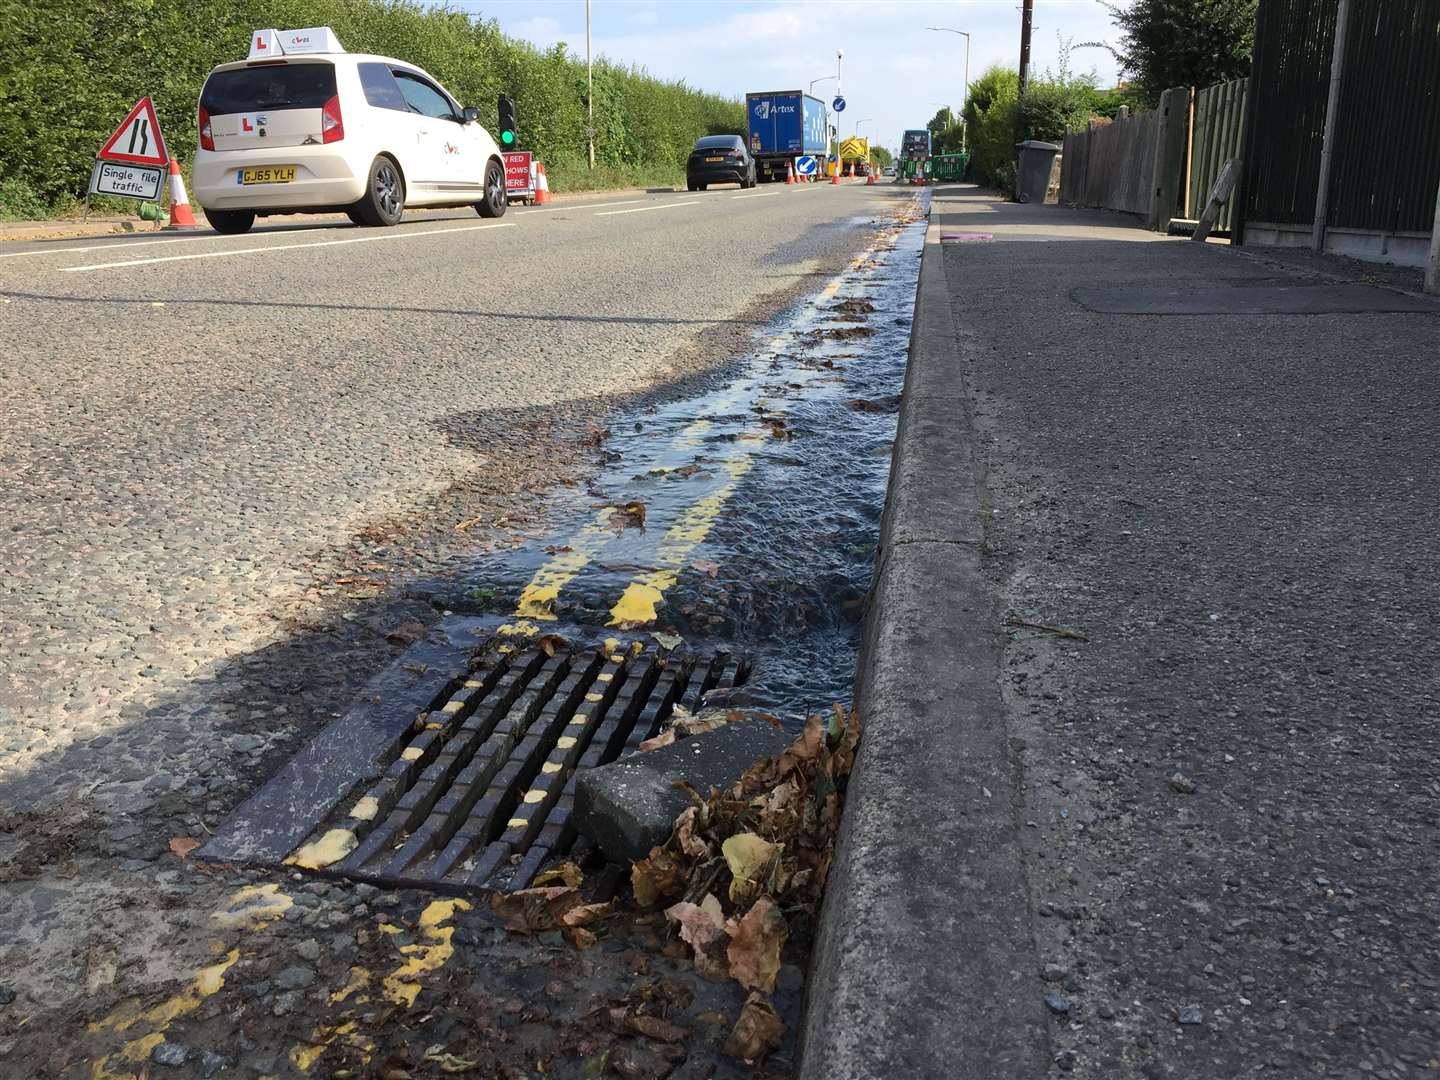 The water leak in New Dover Road was reported last week but has remained unfixed